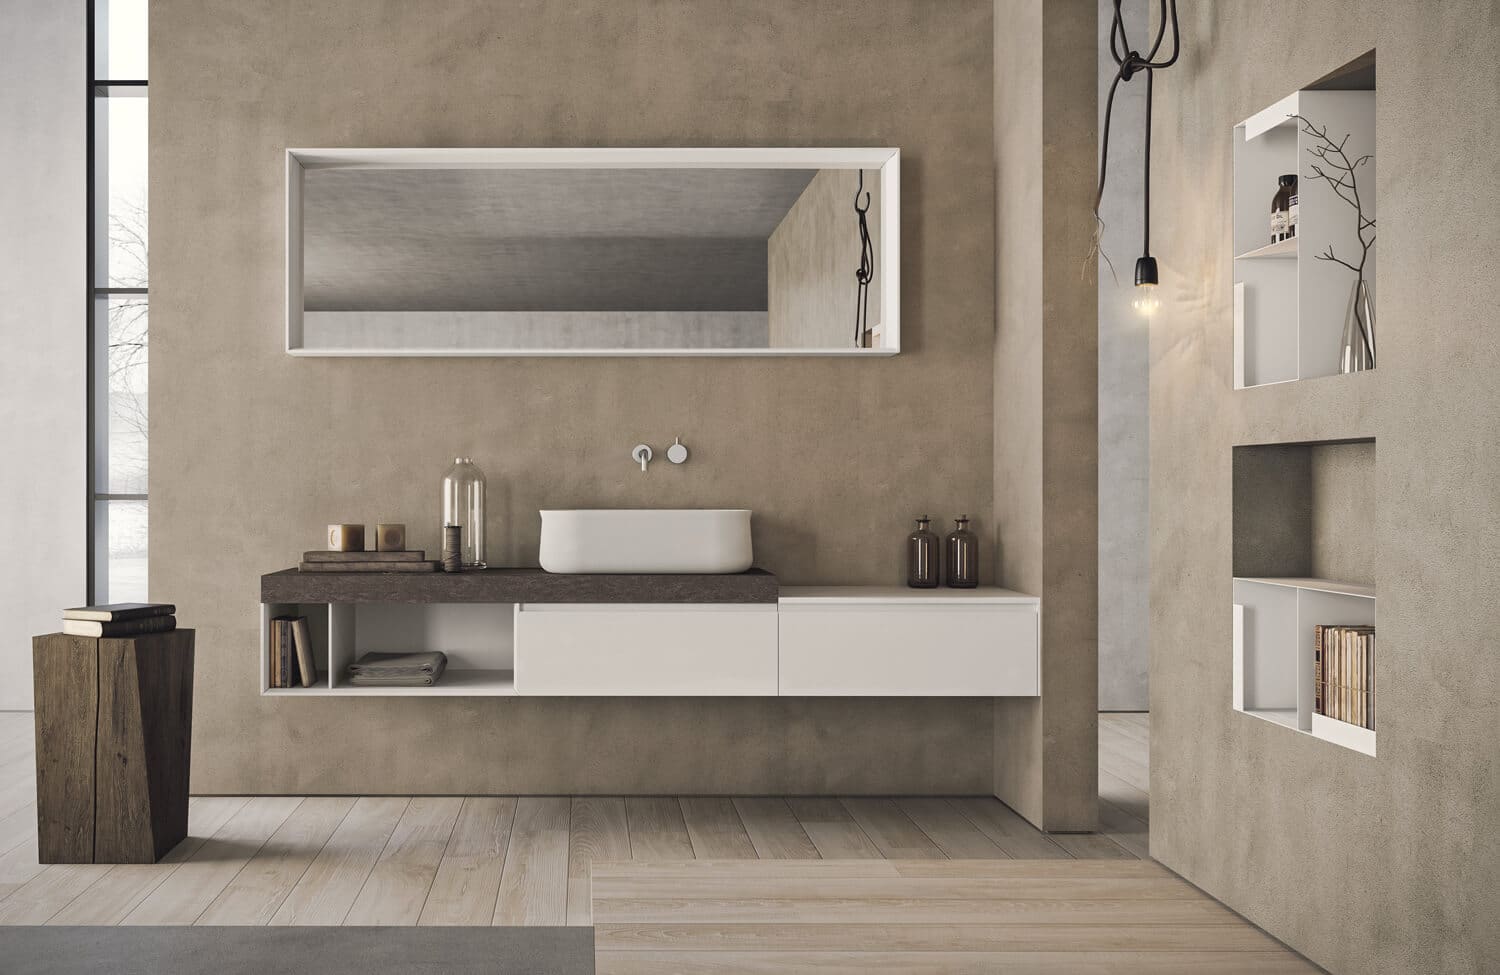 In this modern bath design, contrast comes from the White matte lacquer vanities and the top in Skin HPL, The linear cabinets meet the soft edges of the Flûte washbasin, which evokes the shape of a blossoming tulip.